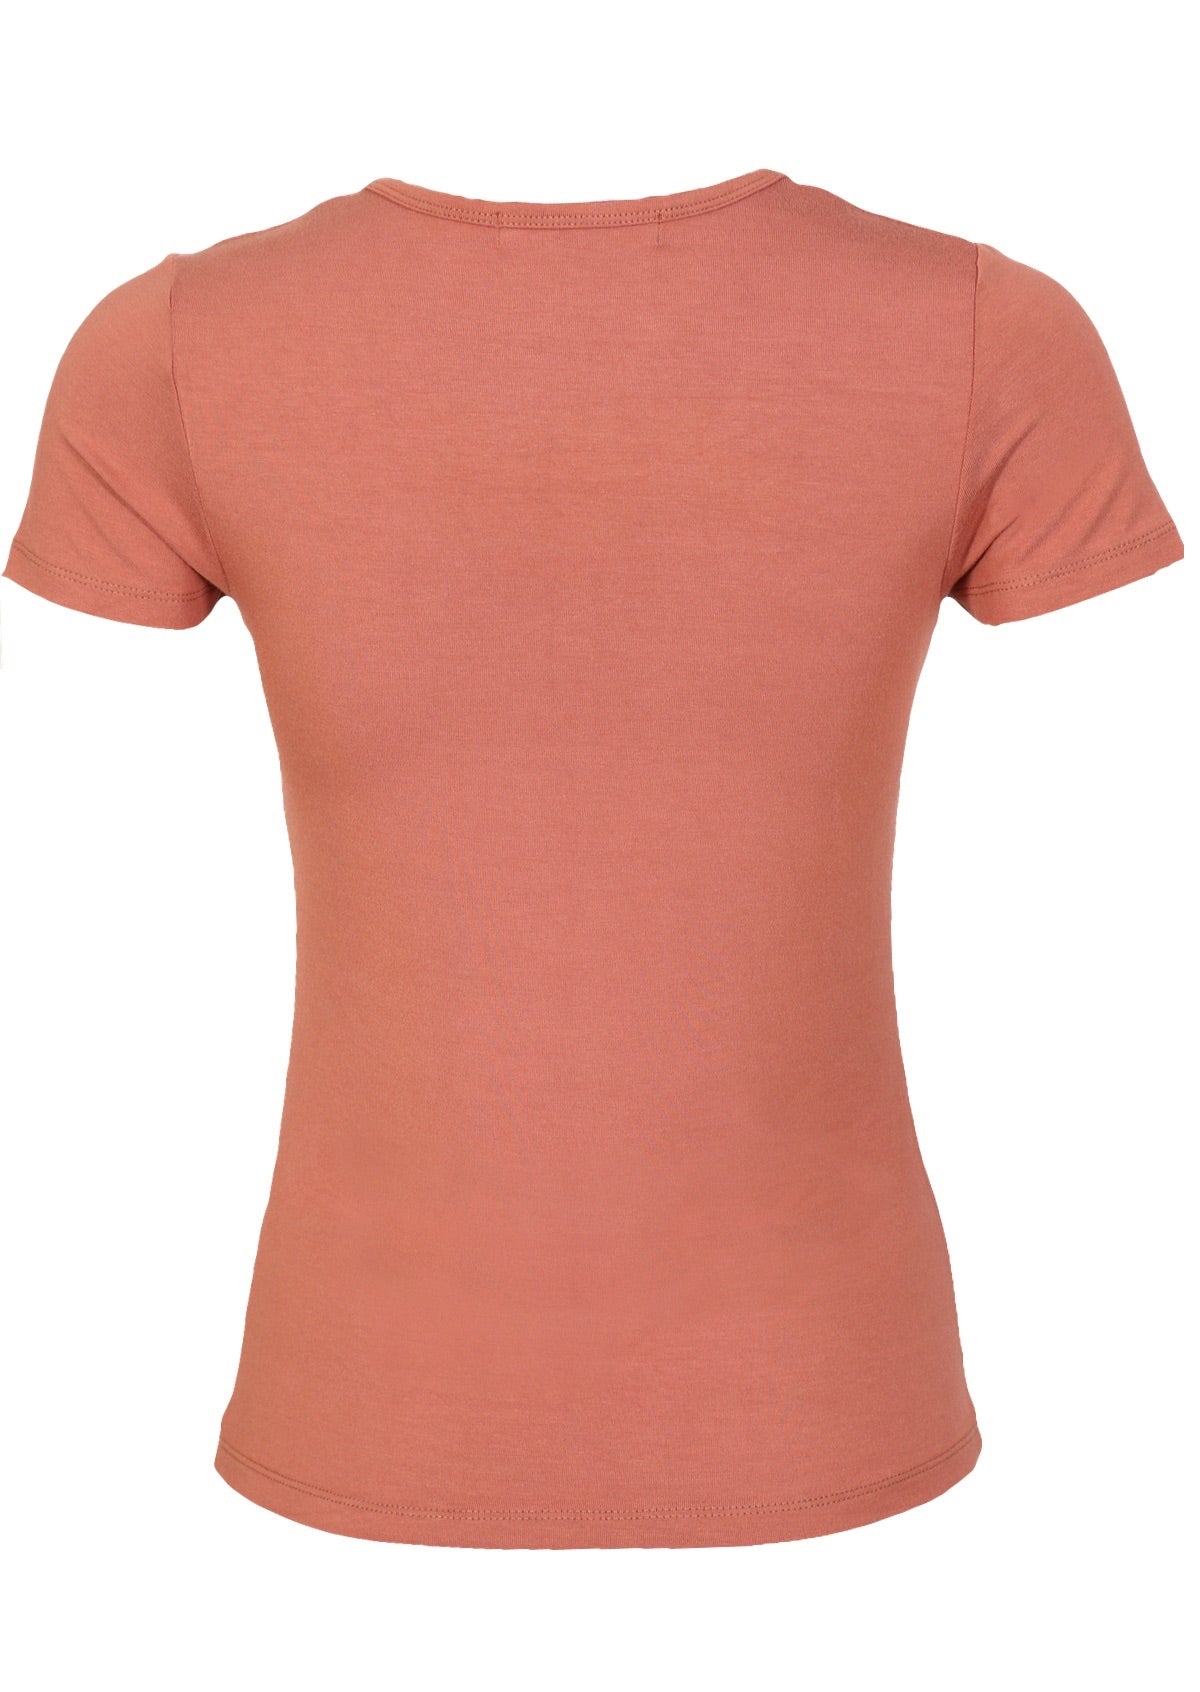 Back view fitted soft dusty pink rayon t-shirt.